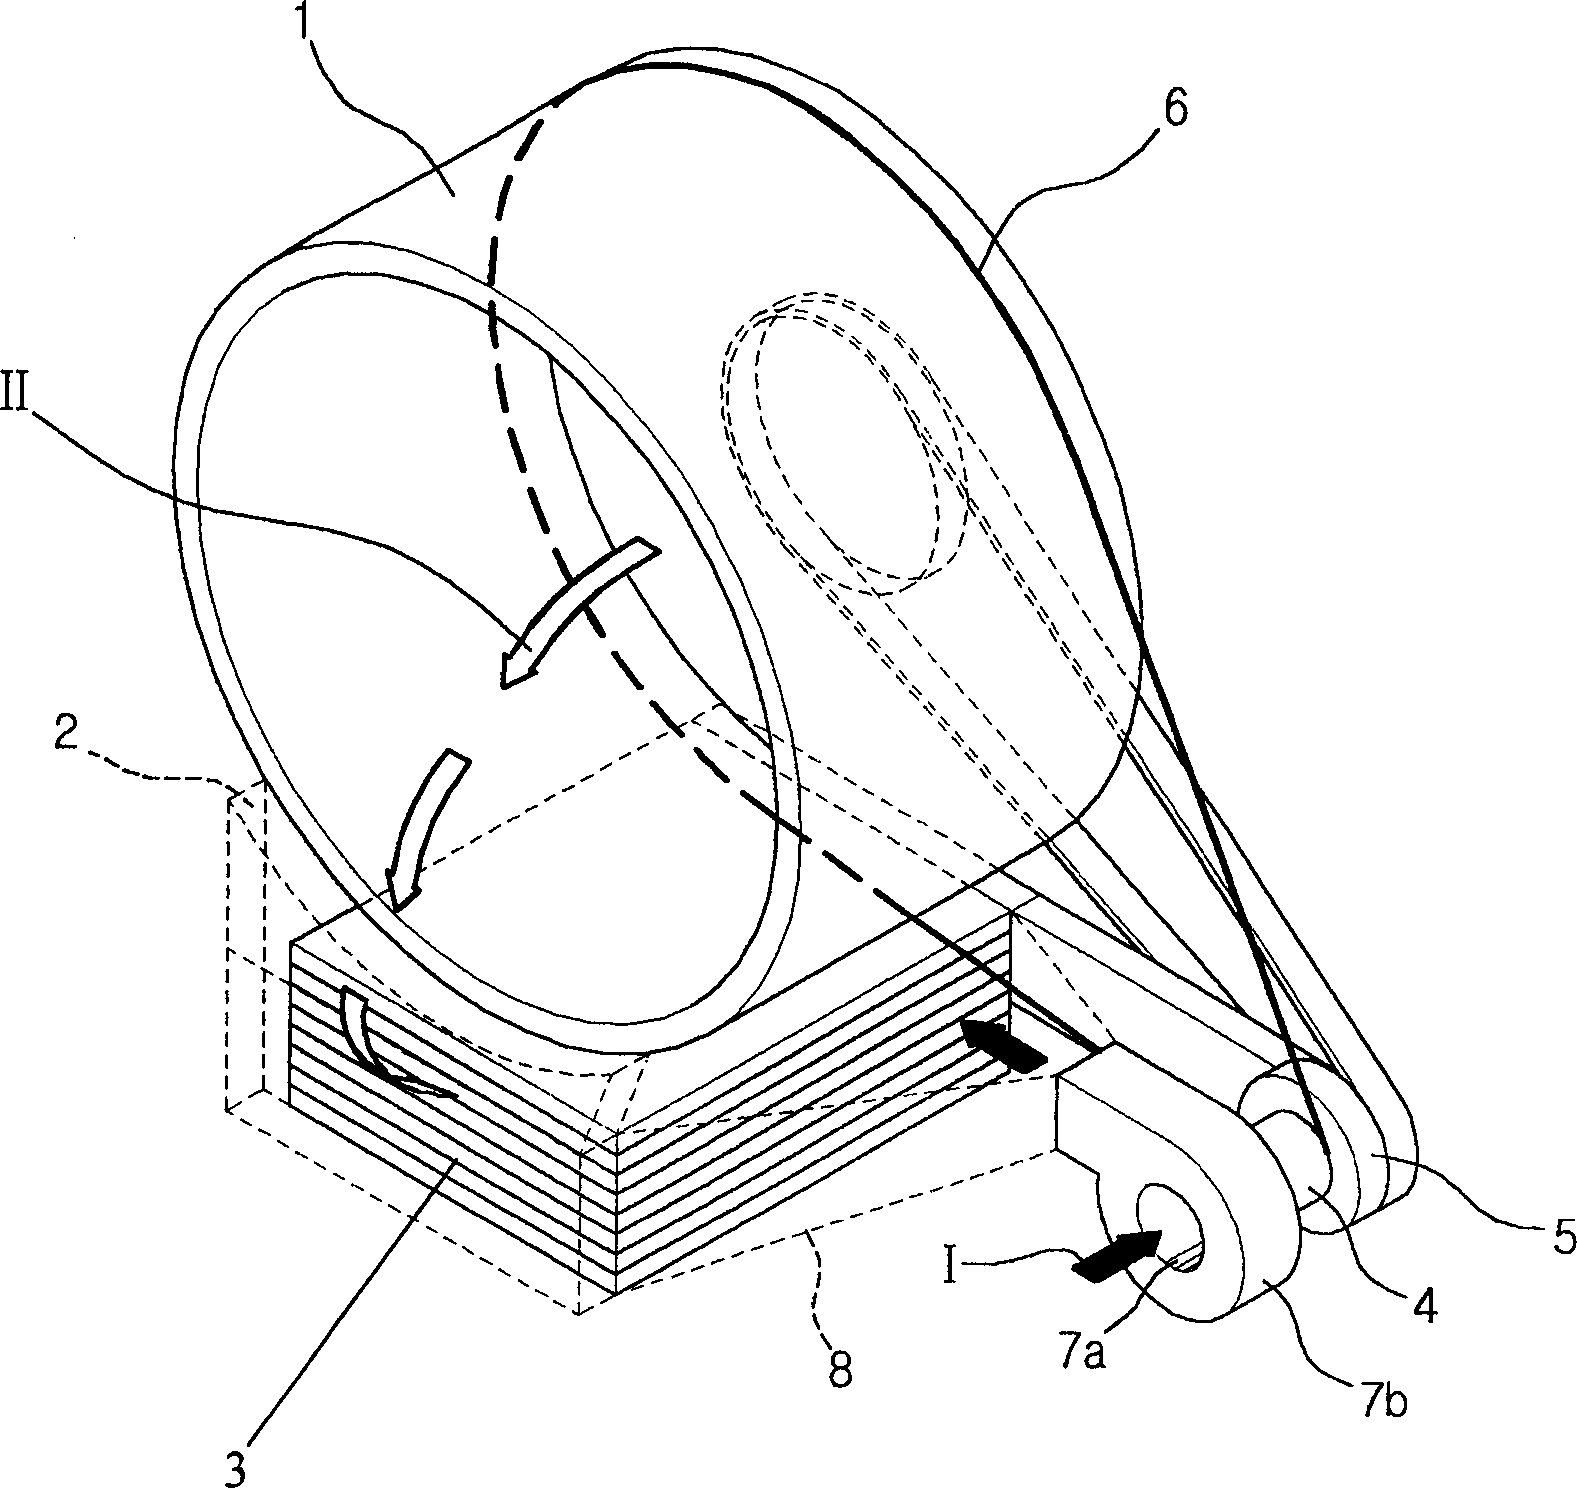 Condensing clothes drying machine and its method for detecting full water level and humidity